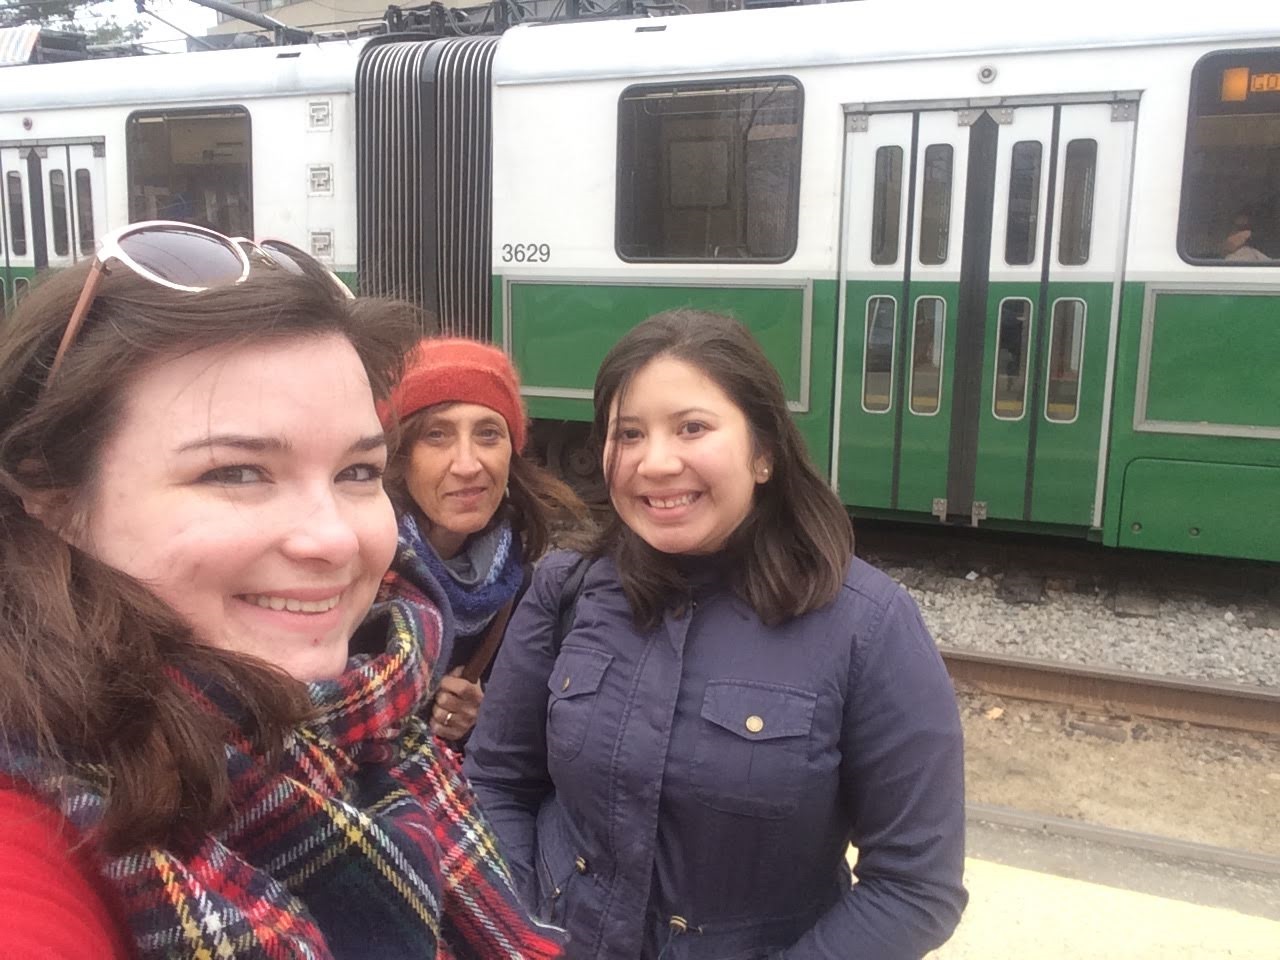 (Left to right) Catherine Gaggioli, Judy Gelman and Araceli Hintermeister founded Books on the T in Boston in 2017. Photo courtesy of Catherine Gaggioli.